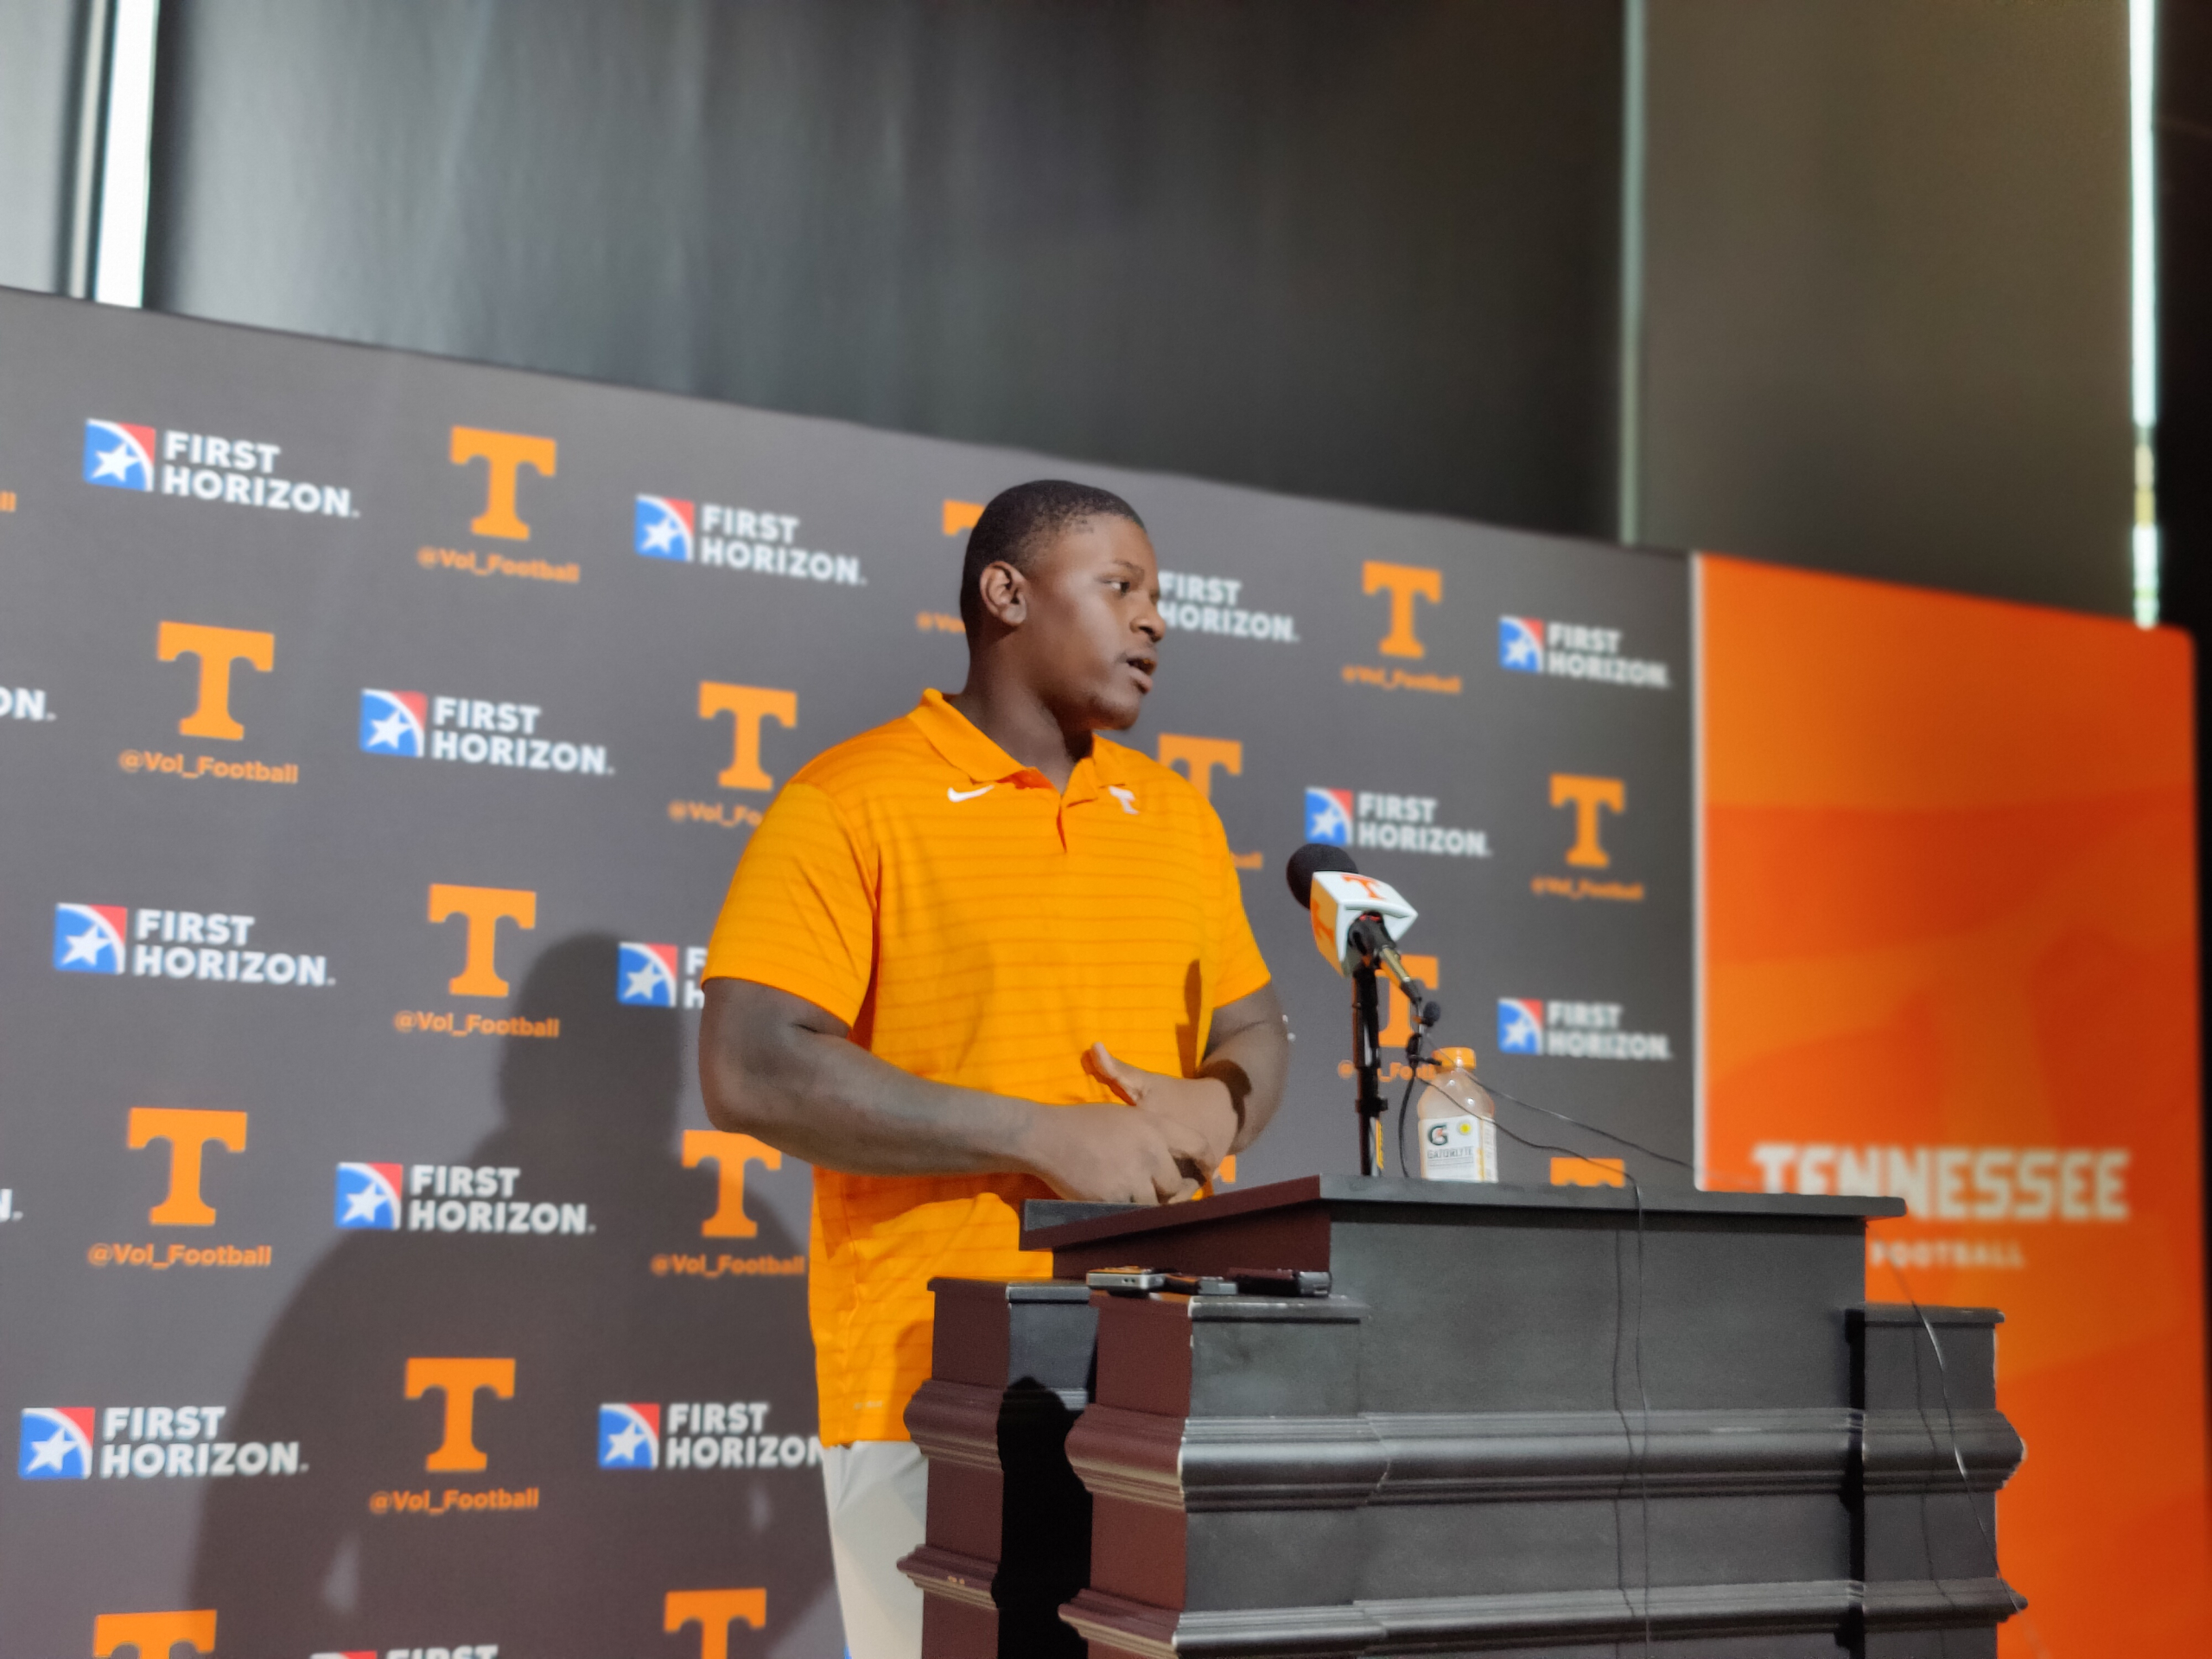 WATCH: Tennessee OL John Campbell Jr. spoke to the media after Day 5 of Fall Camp